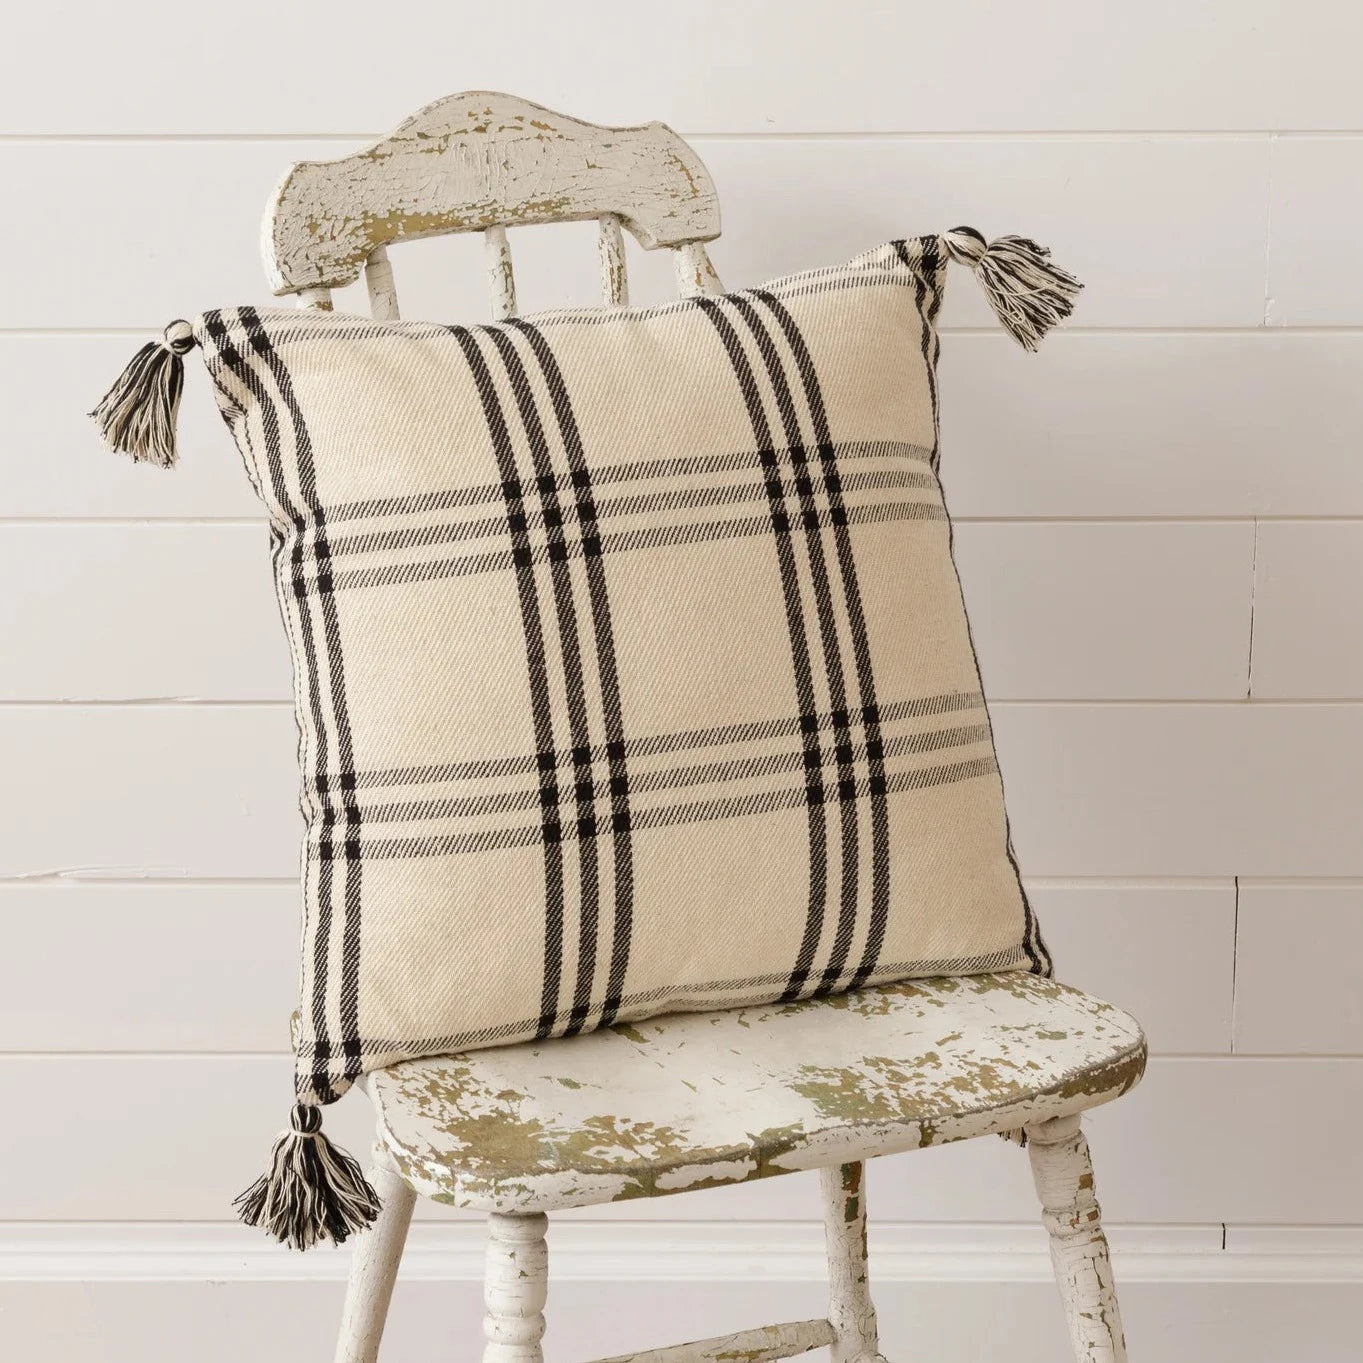 Black and White Windowpane pillow with tassels 